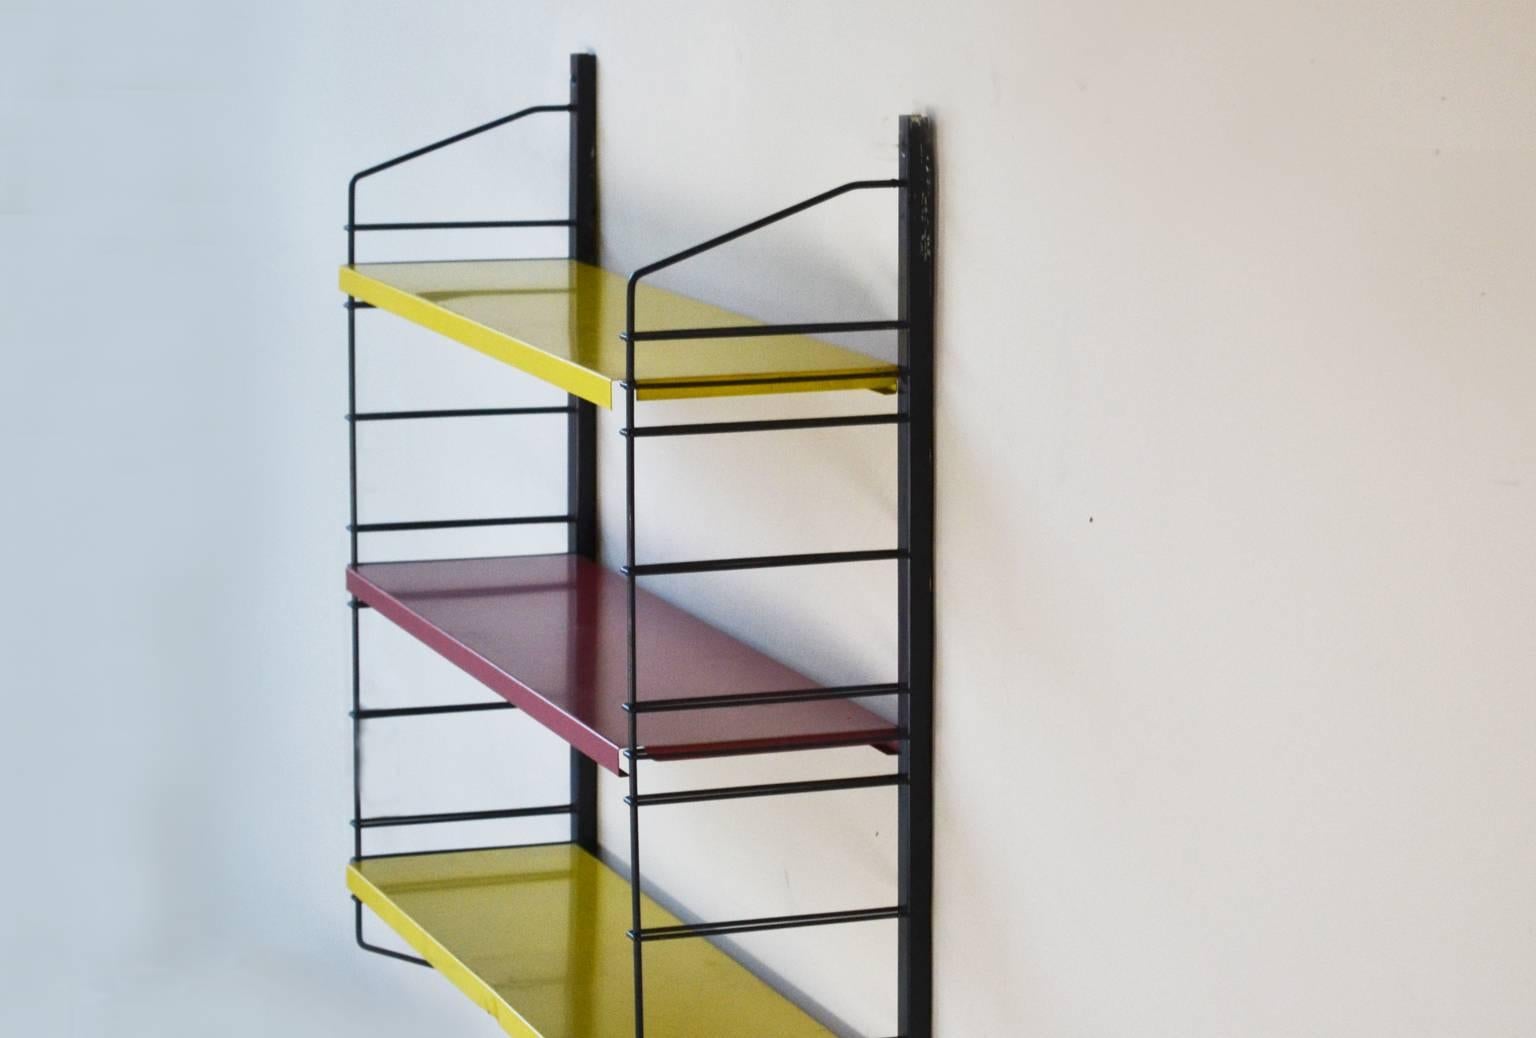 A modular, adjustable Tomado shelving system unit designed in the 1960s by Adriaan Dekker. The unit is in the original colors and finish, a black powder coated metal support frame with yellow and red painted shelves. The colors refer to the color